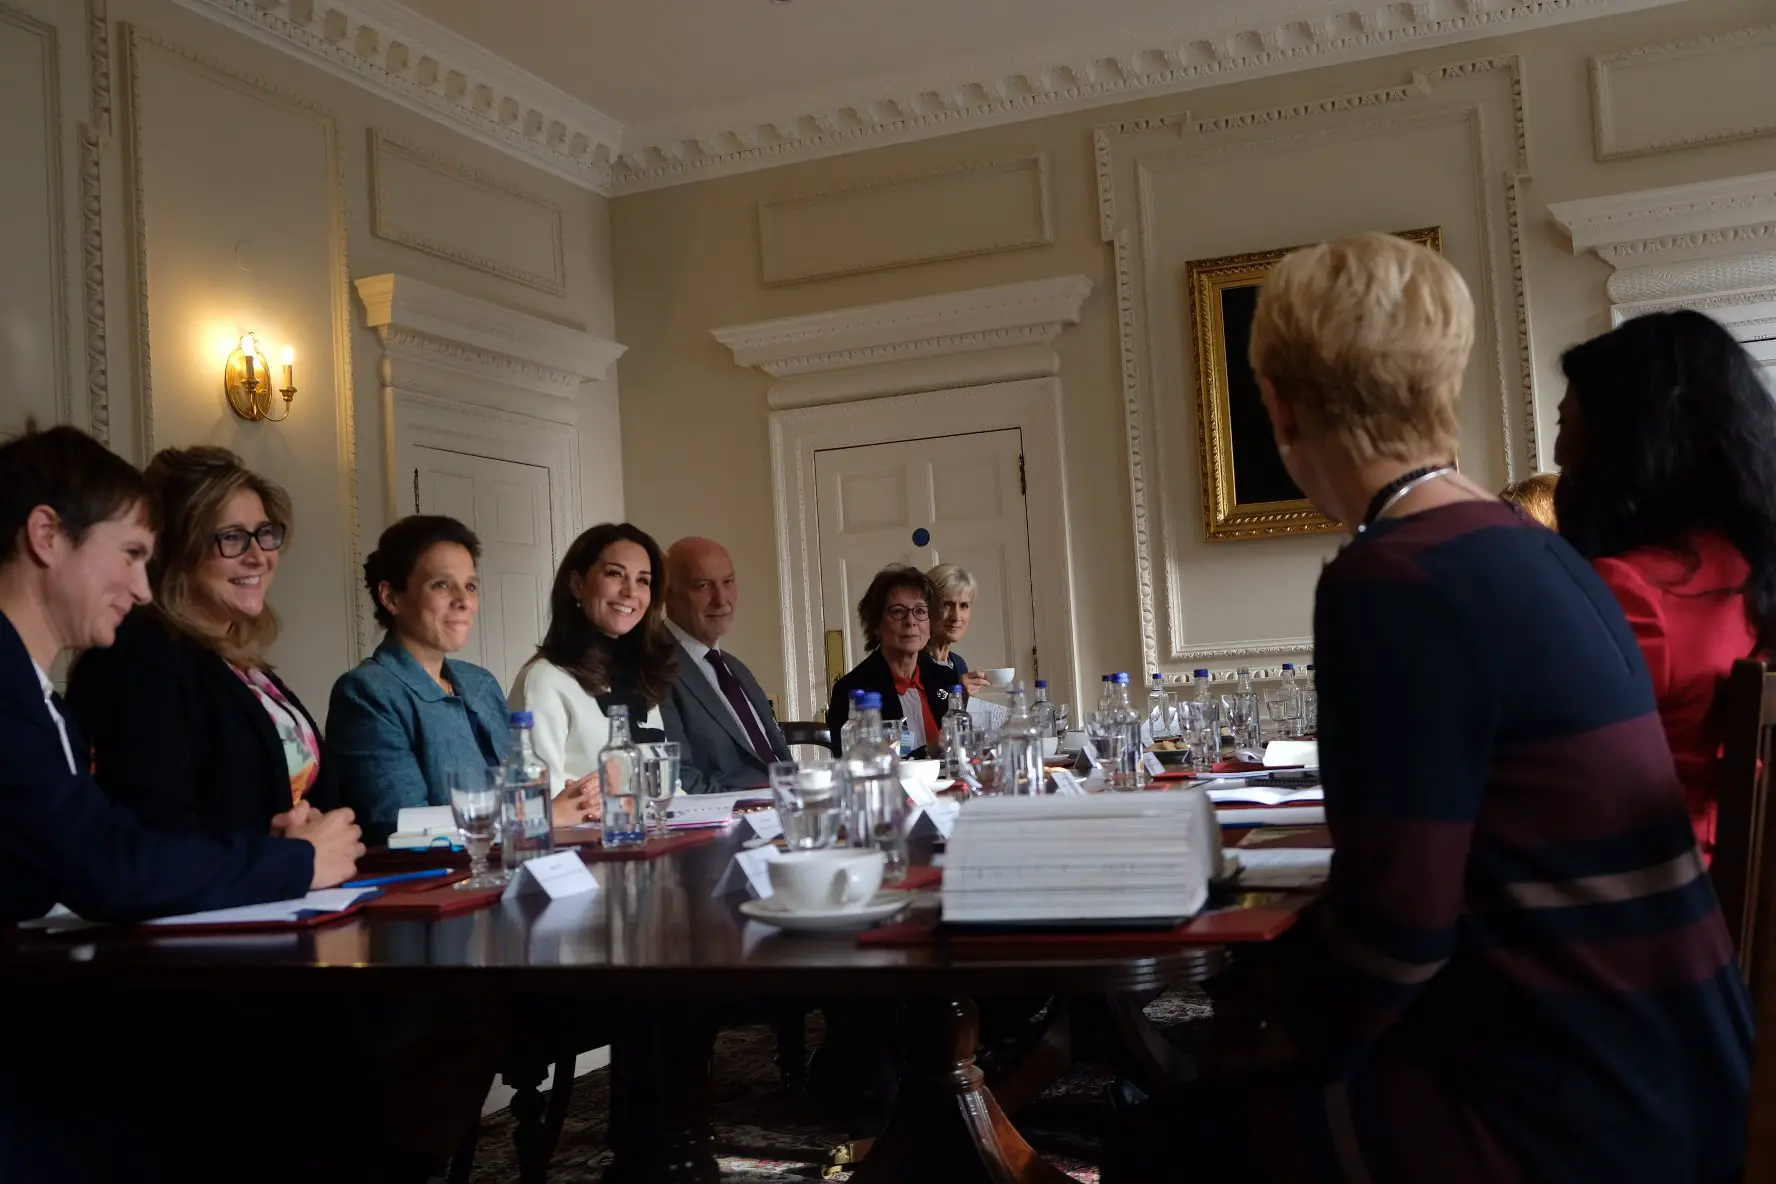 The Duchess of Cambridge hosted Roundtable Discussion on Mental Health